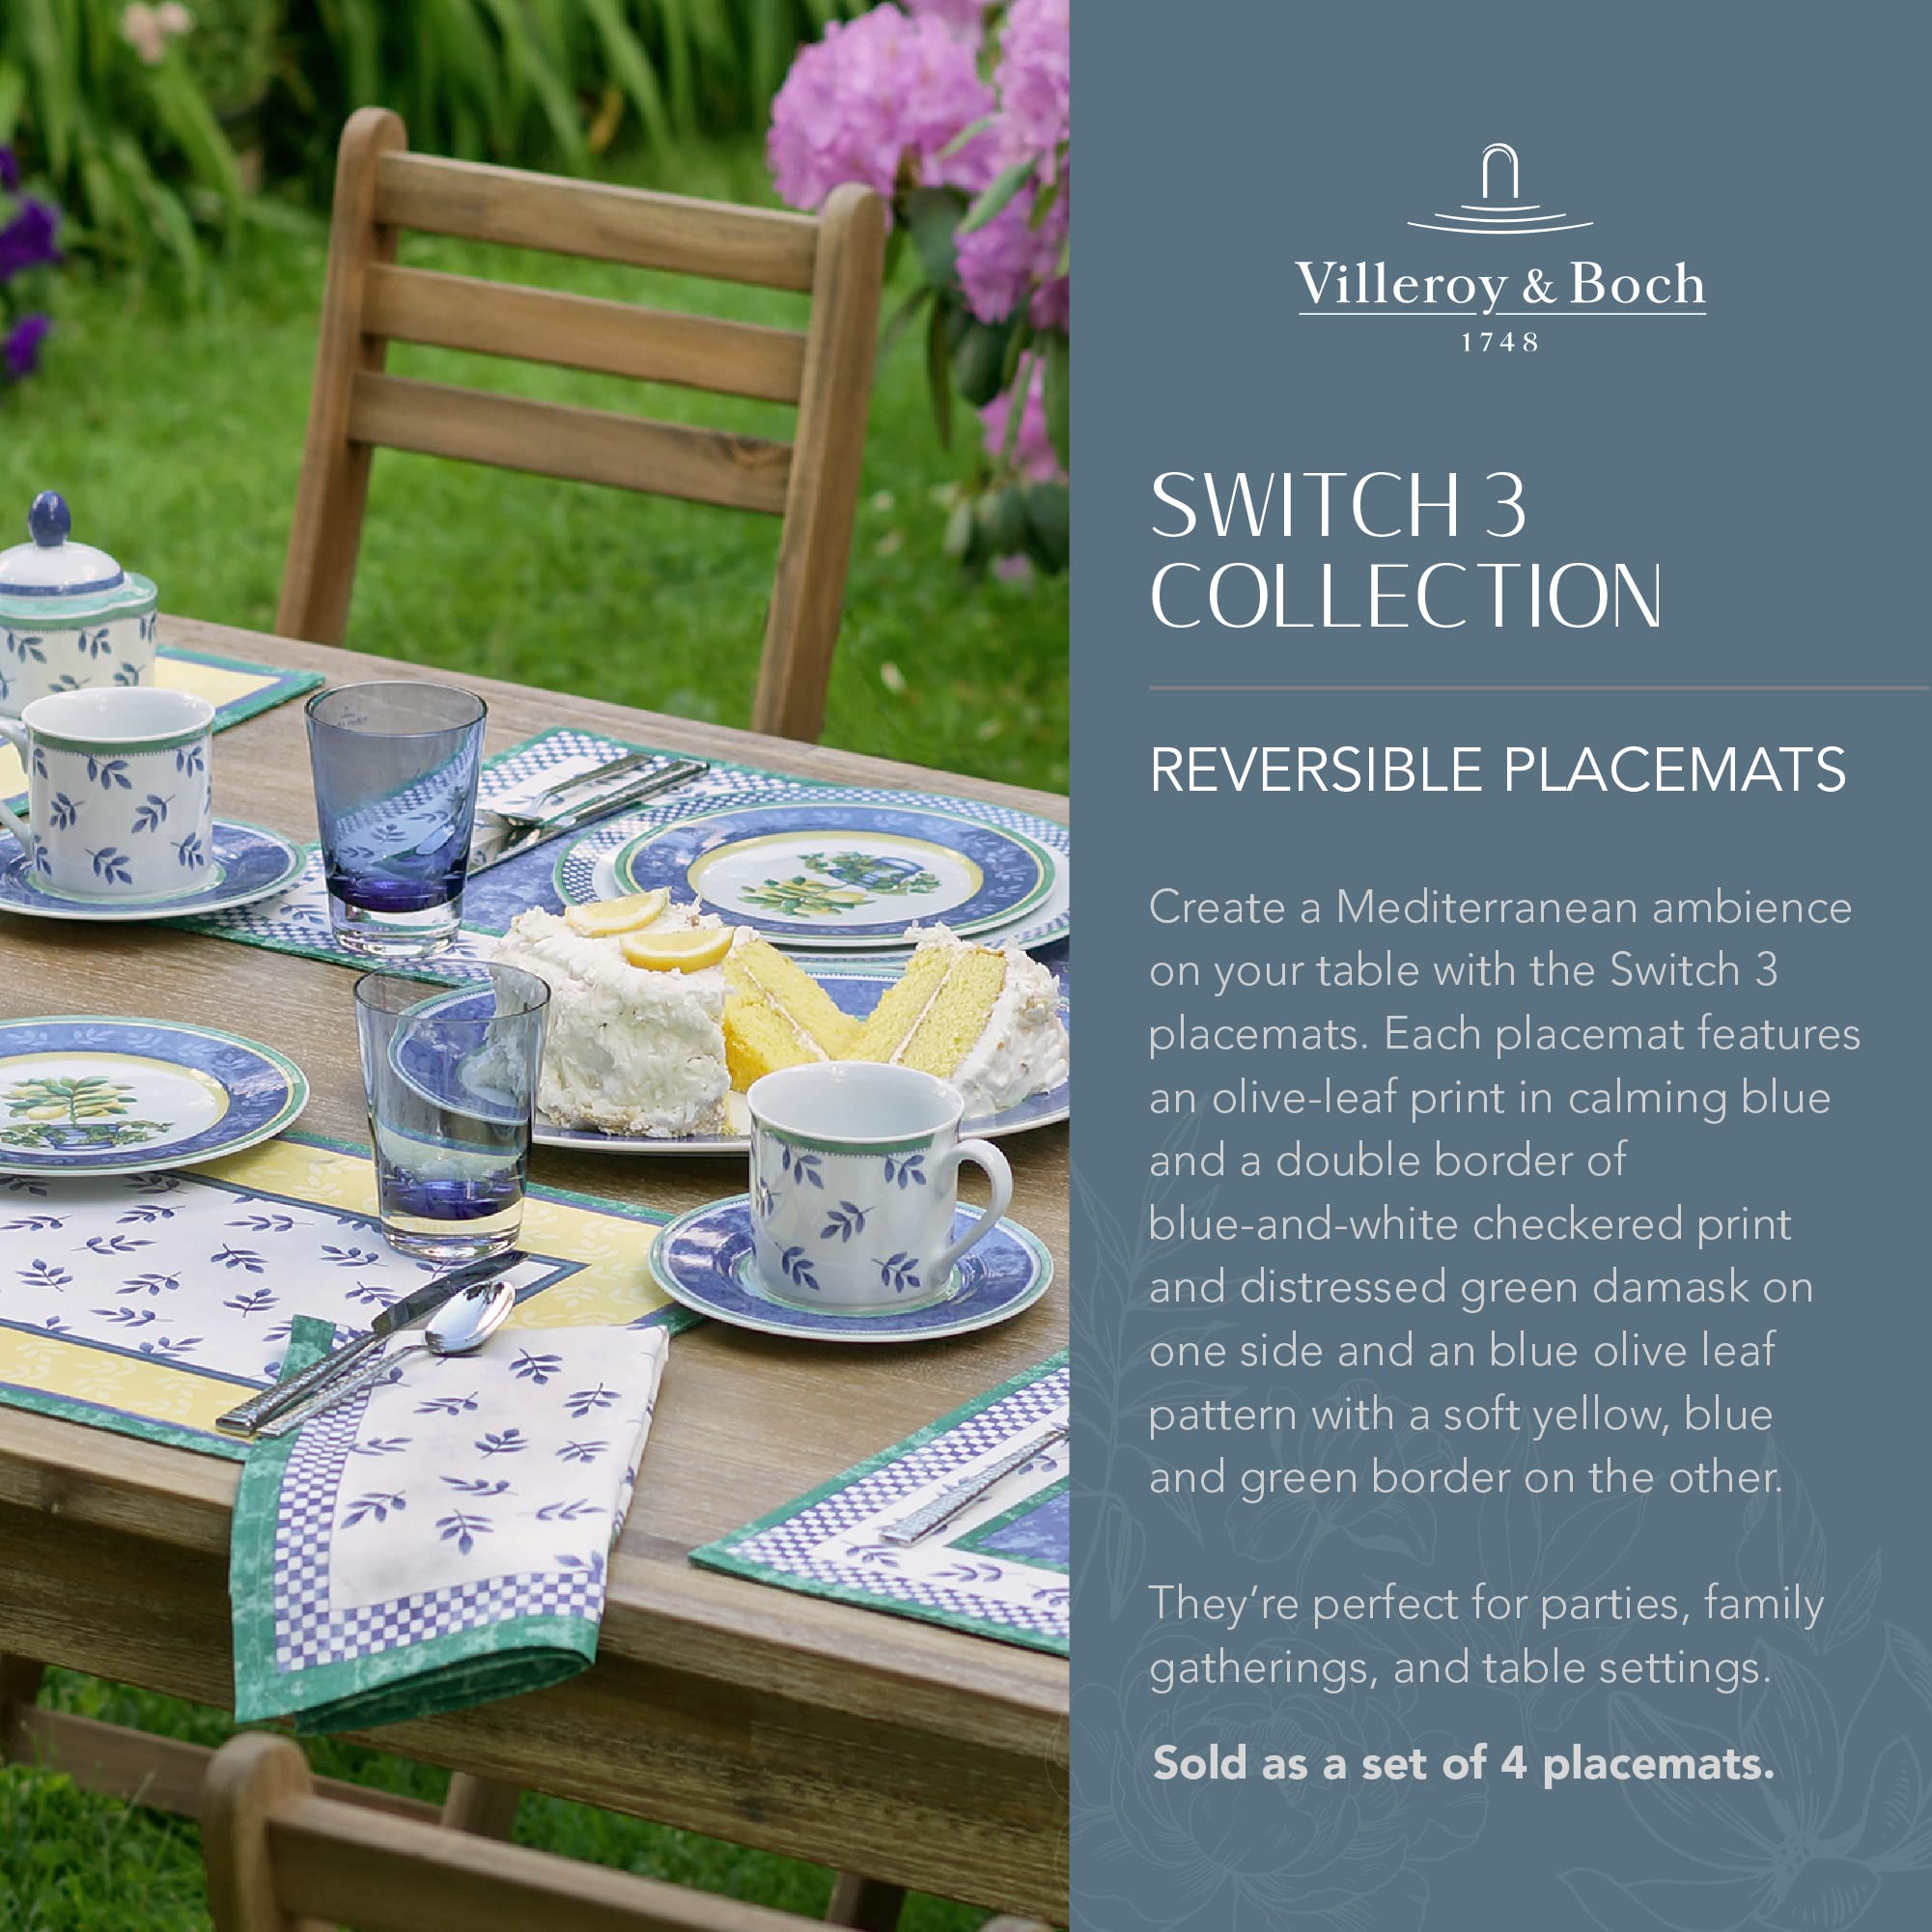 Villeroy and Boch Switch 3 Reversible Cotton Bordered Placemats, 14 Inches by 20 Inches, Set of 4